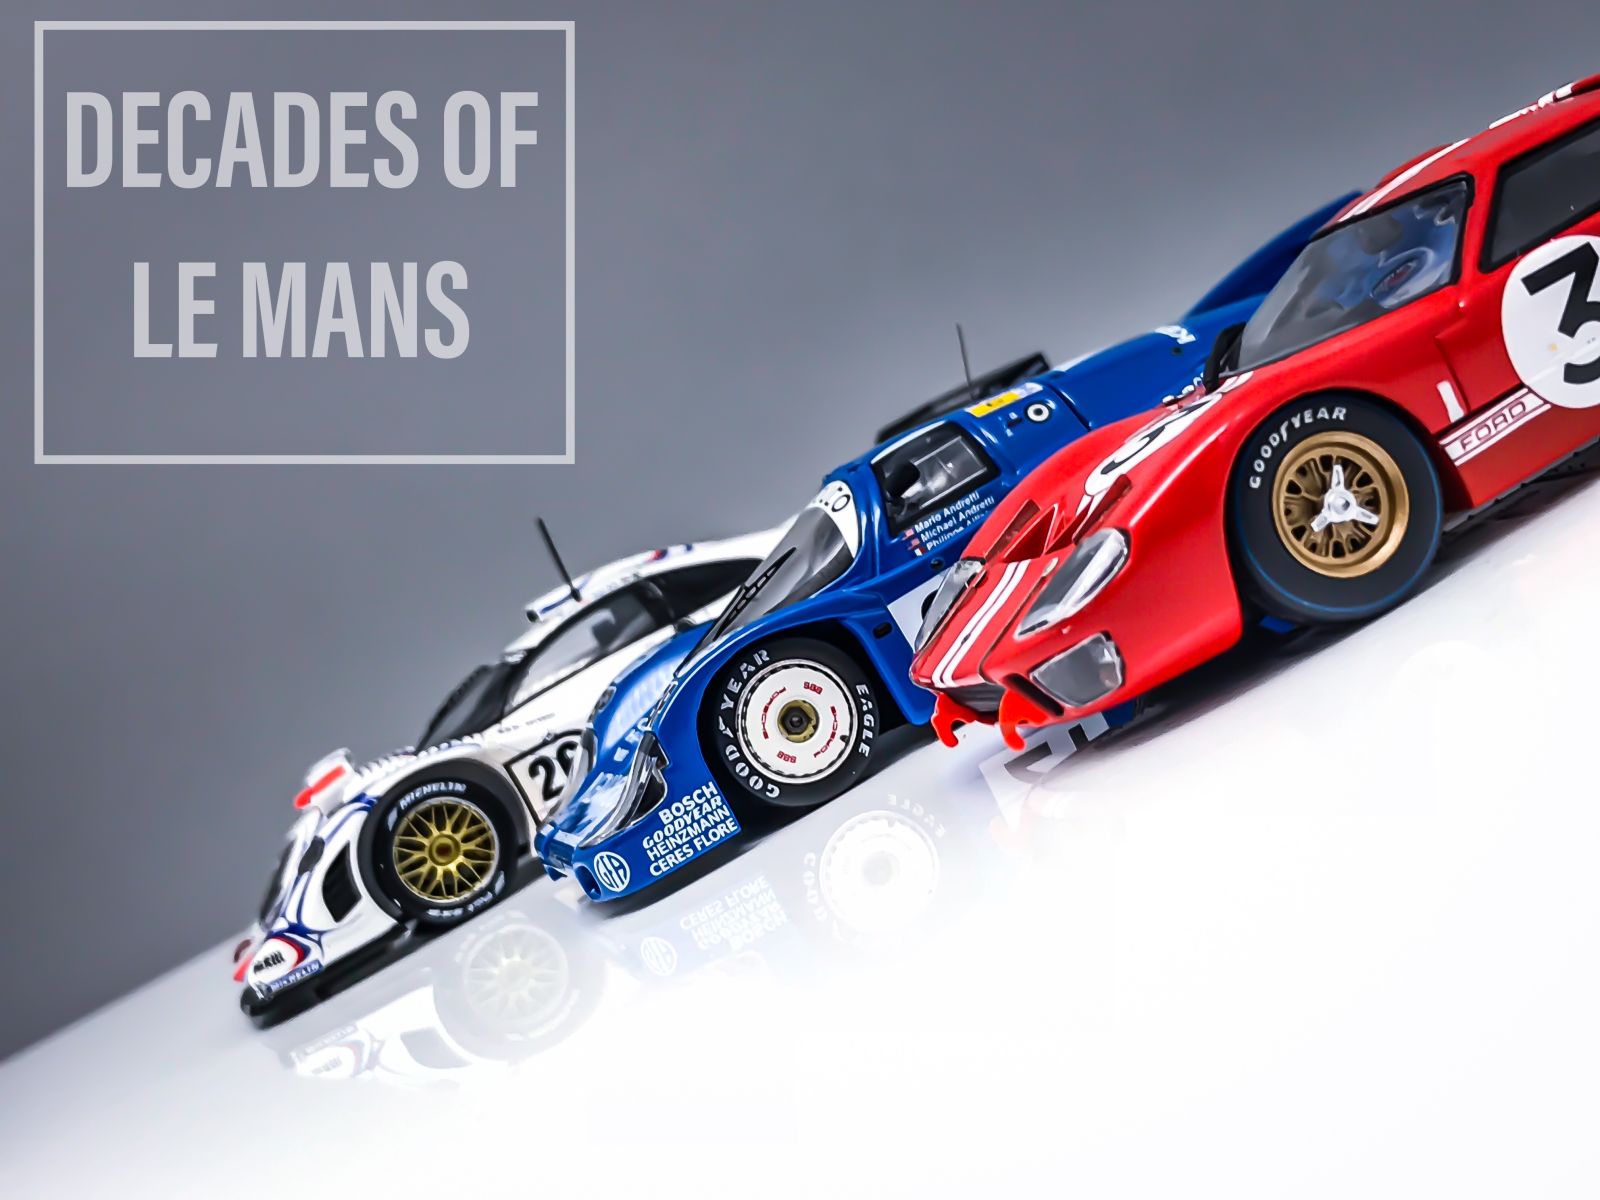 Illustration for article titled Decades of Le Mans